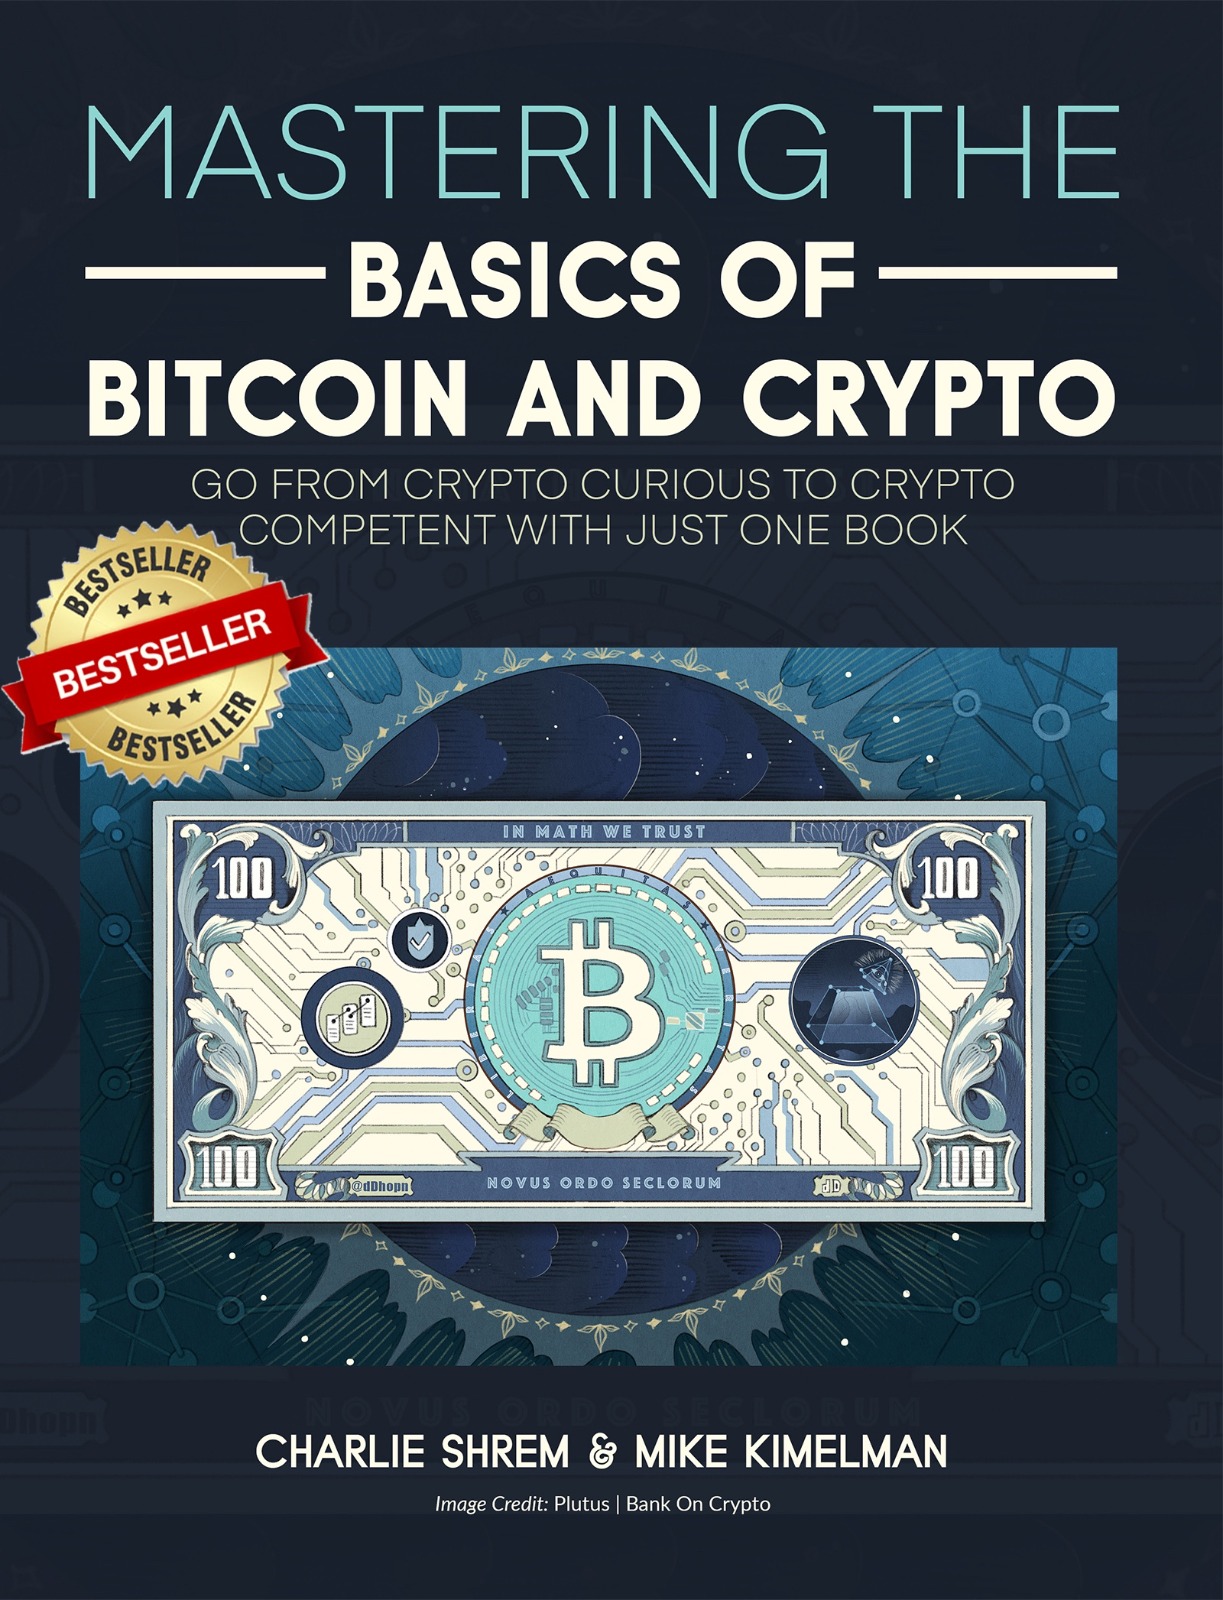 Go From Crypto Curious to Confident With Just One Book, Say Authors